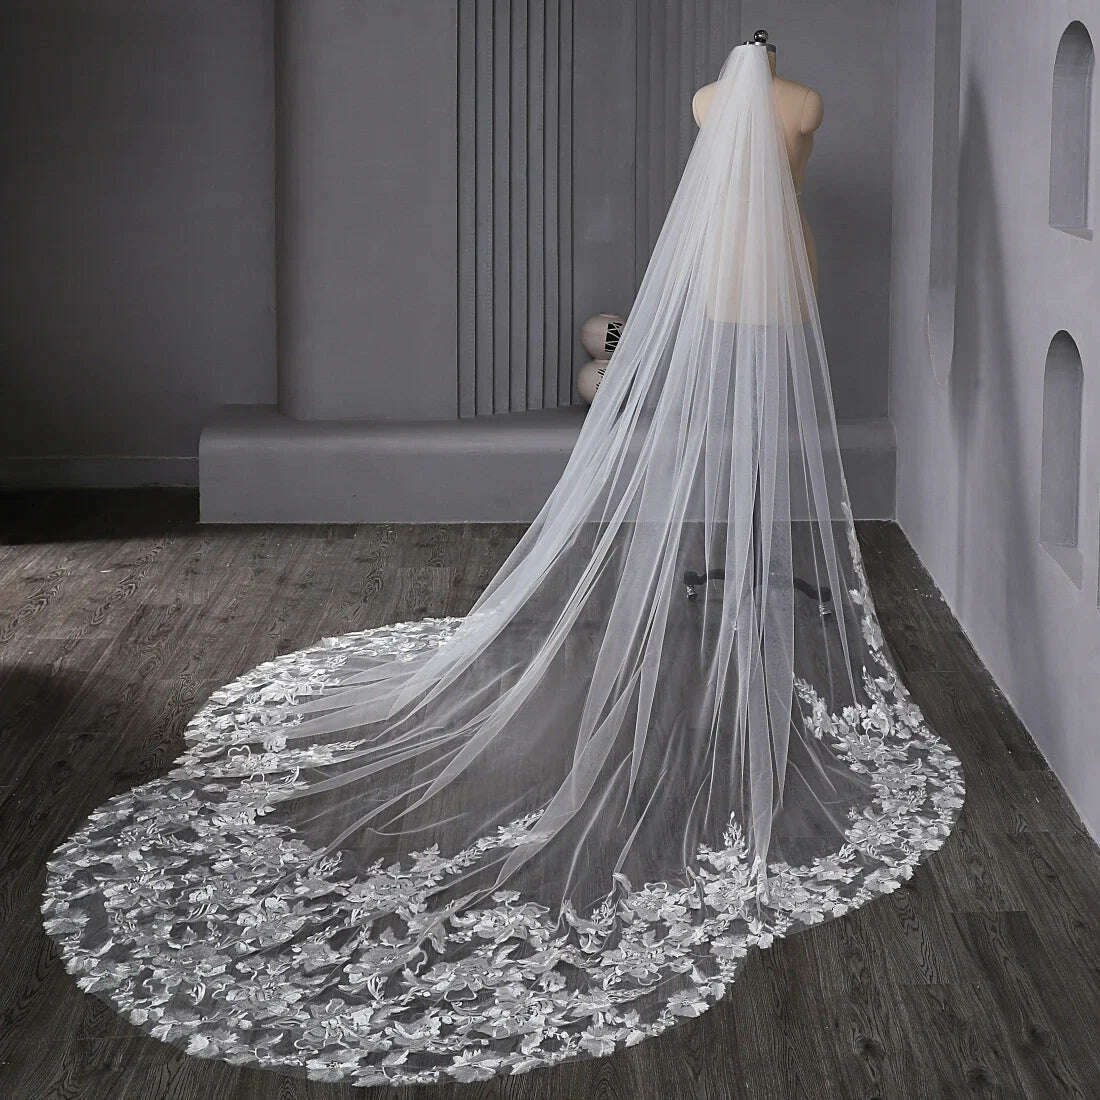 KIMLUD, Long Bridal Veil 1 Tier Wedding Veil with Comb White Ivory Cathedral Lace Appliques Scalloped Veil for Bride Accessories 300cm, Off-White / 400cm, KIMLUD Women's Clothes